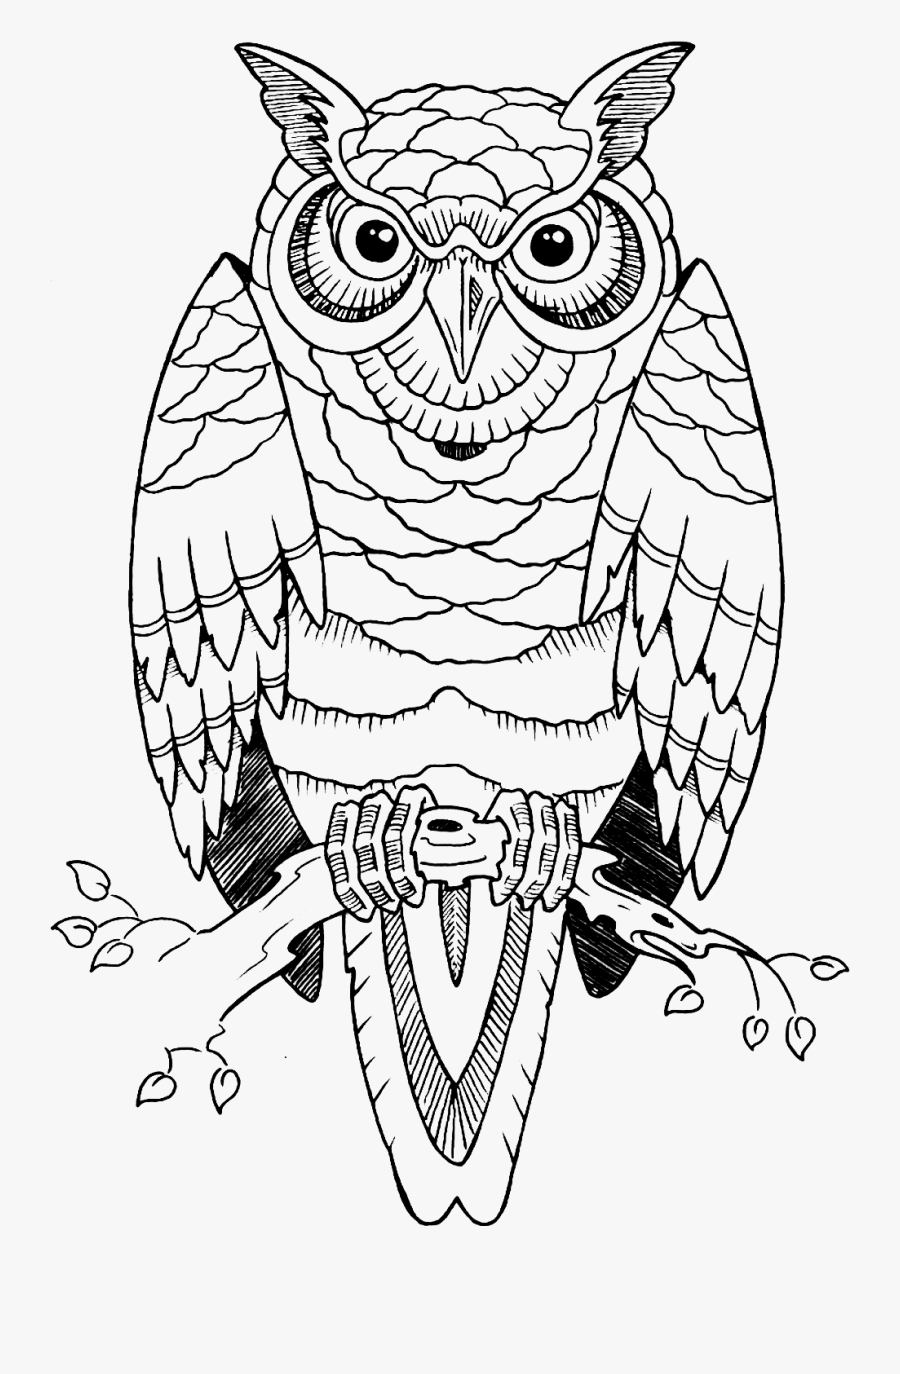 Idea Owl Drawing Tattoo Free Transparent Image Hd Clipart - Owl Tattoo Design Outline, Transparent Clipart